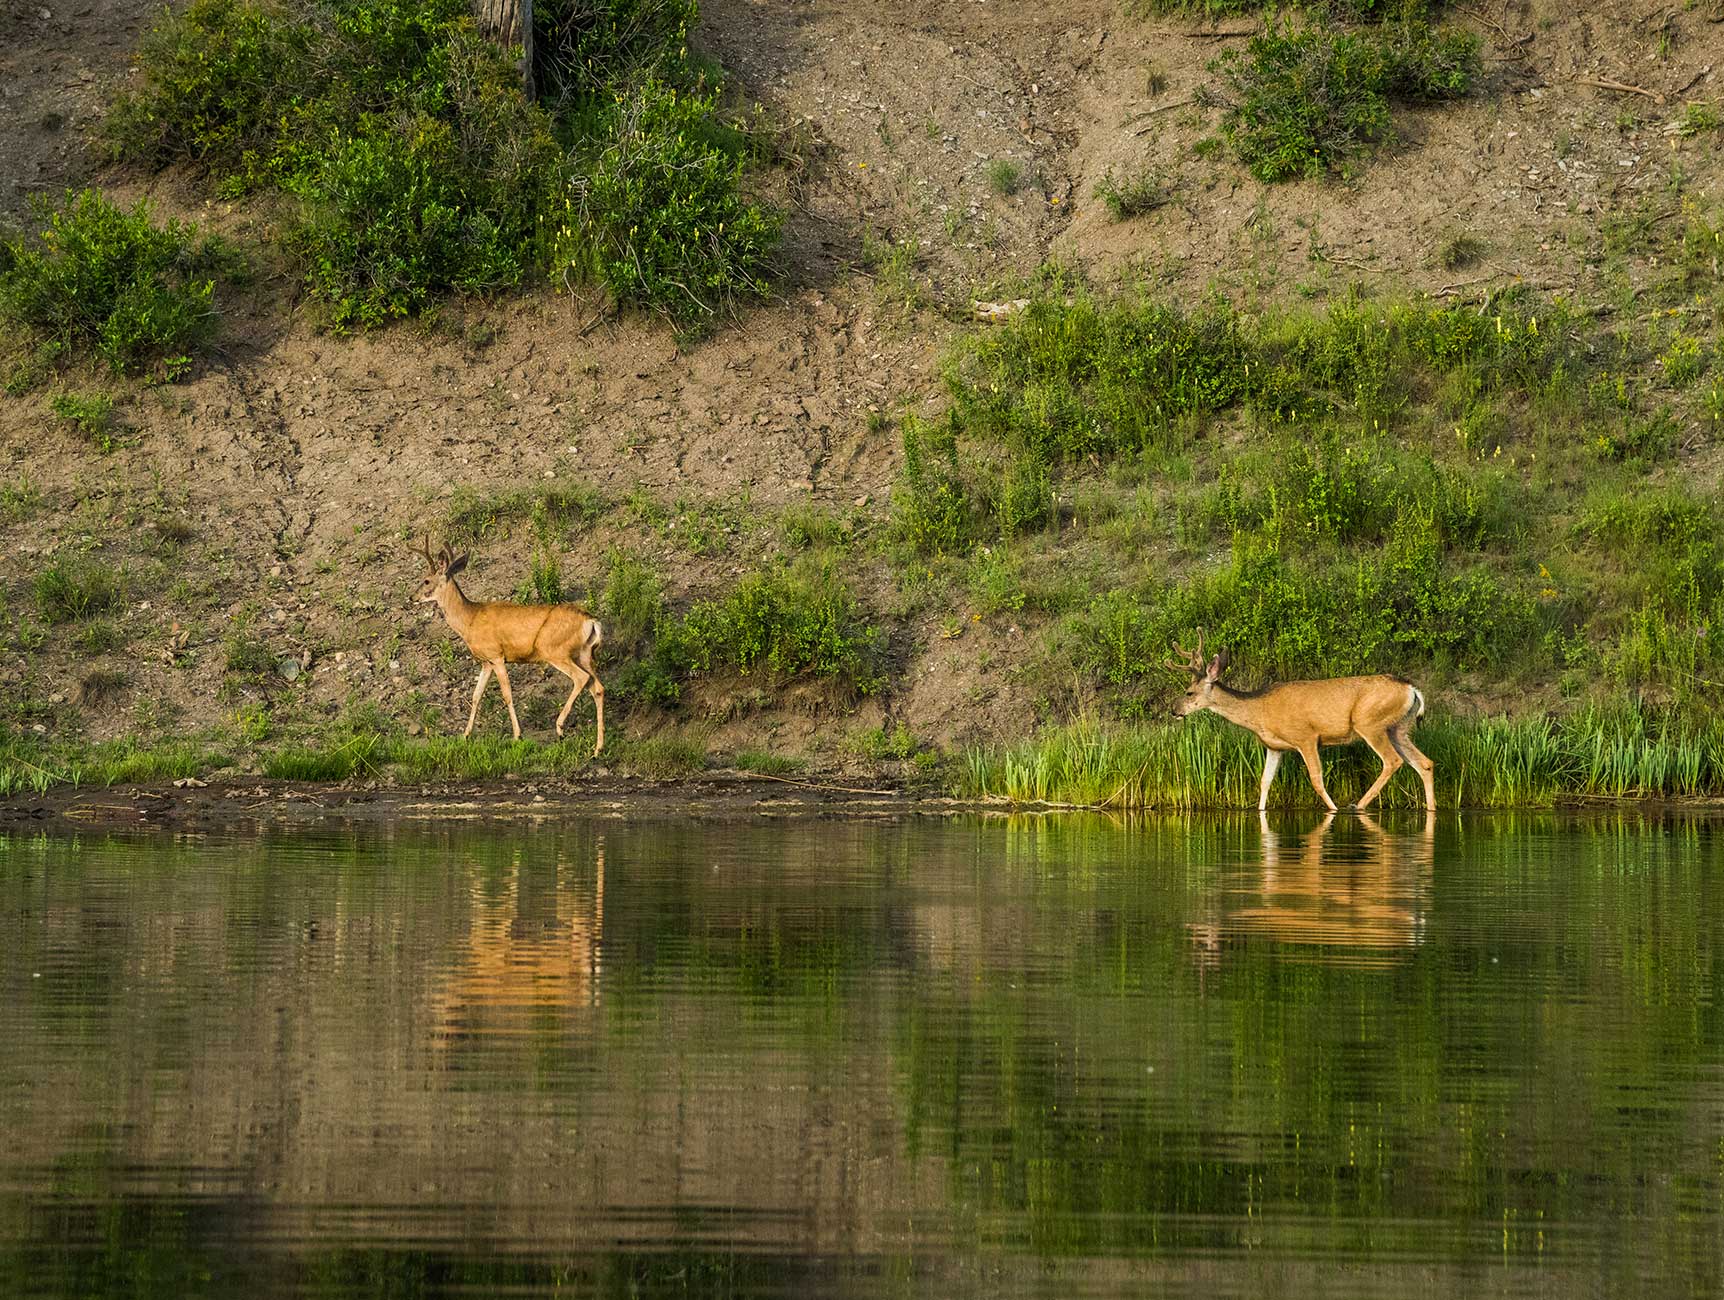 about pagosa - deer in pagsoa river